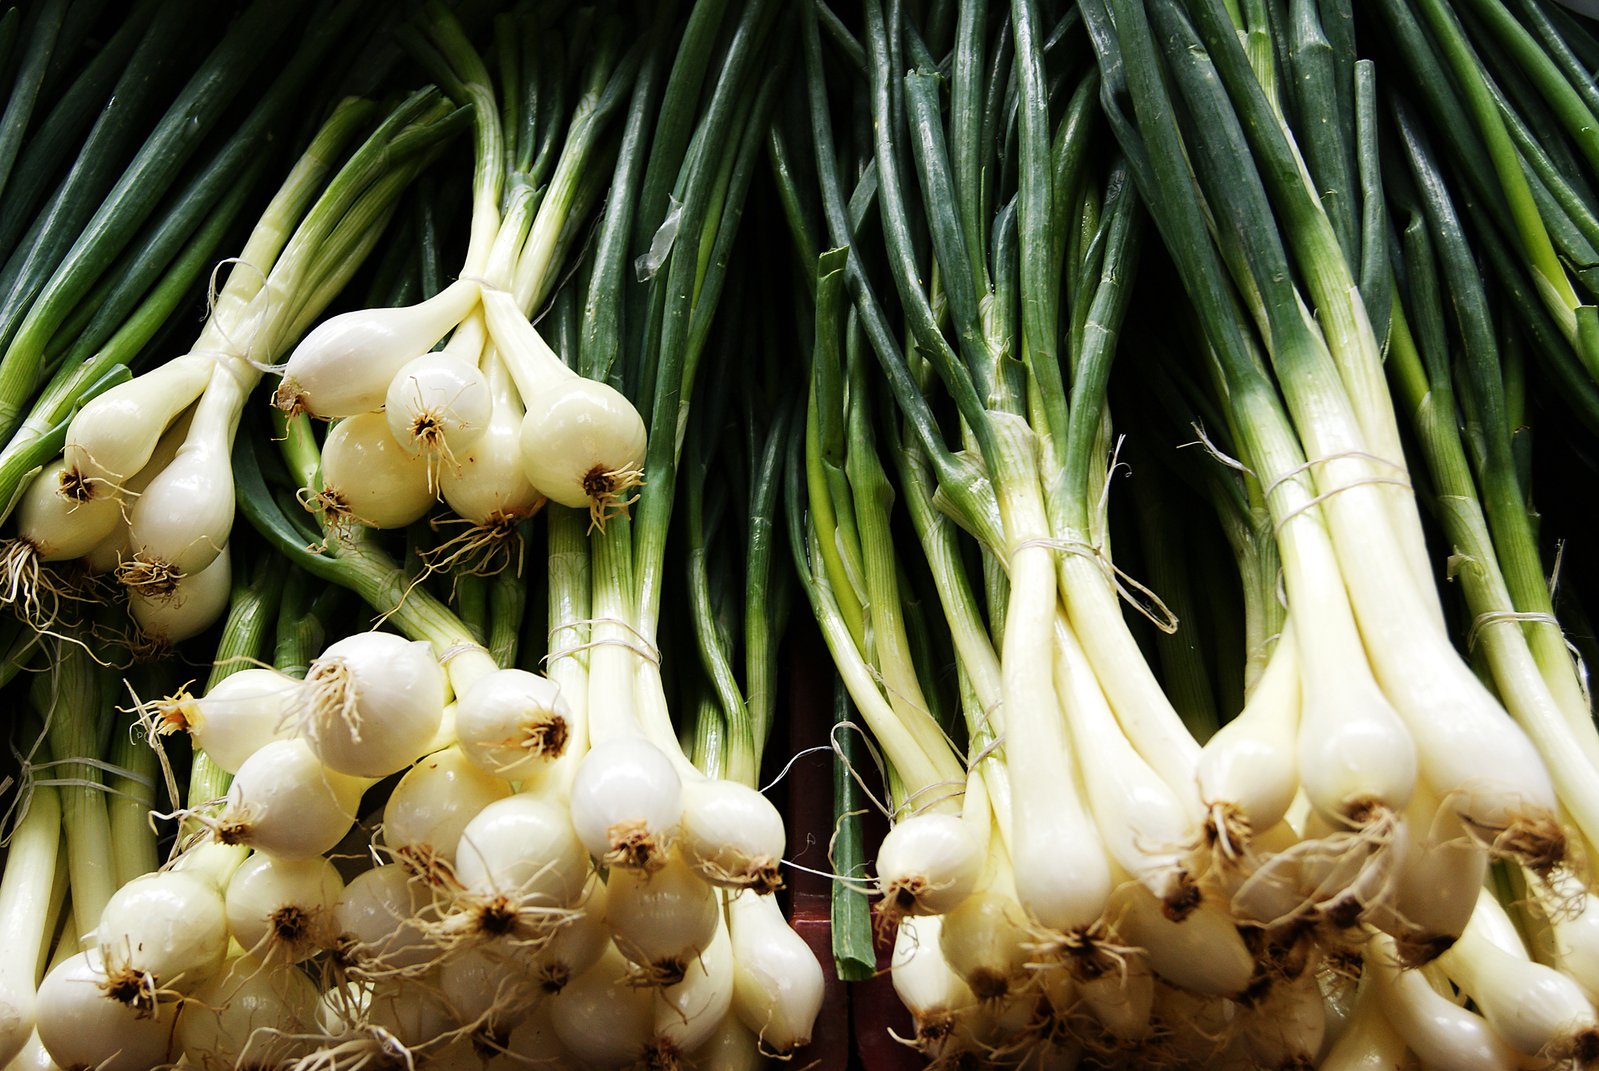 many green and white onions on display at a store